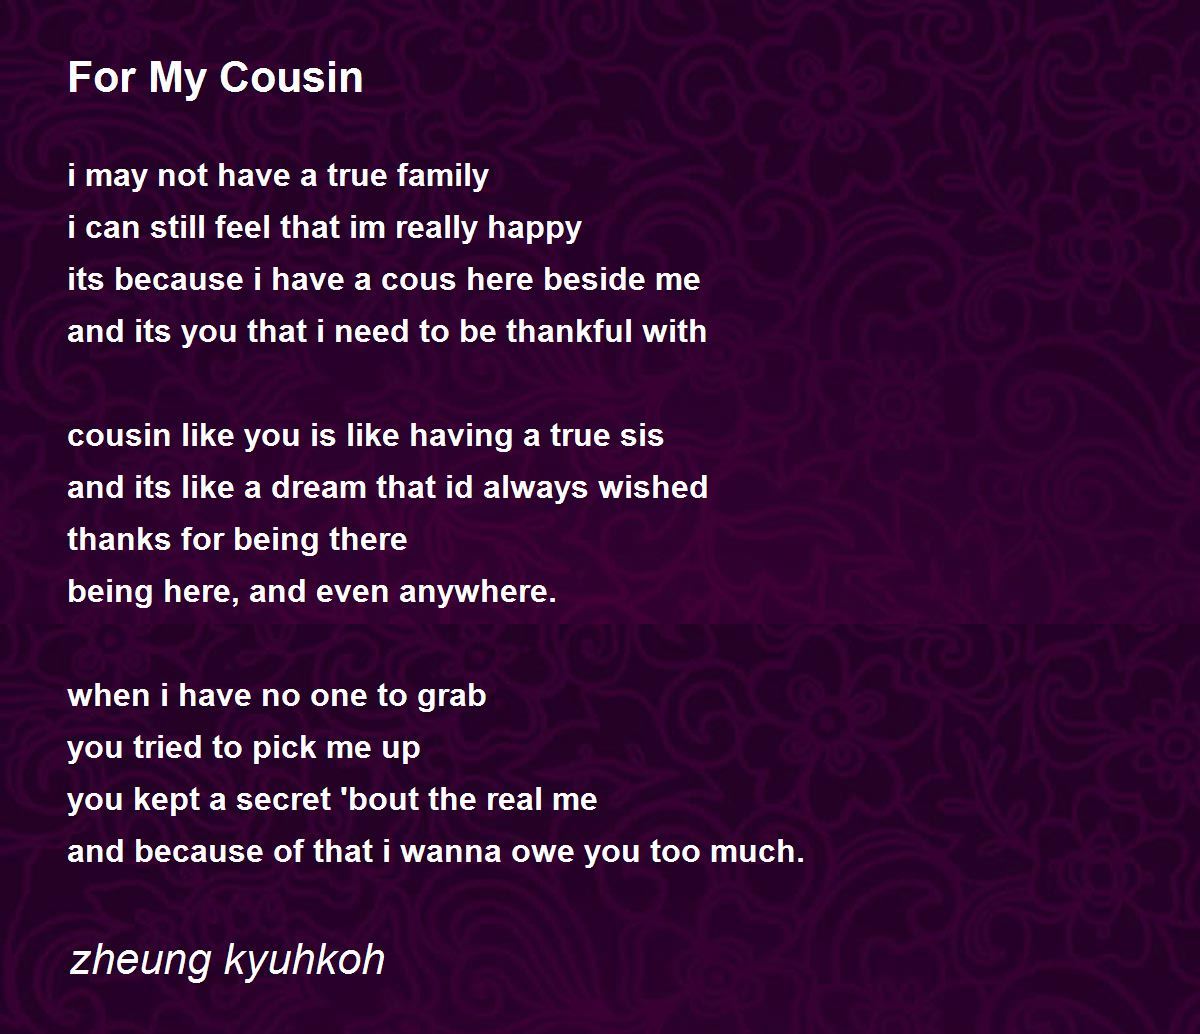 what-is-a-cousin-poem-sitedoct